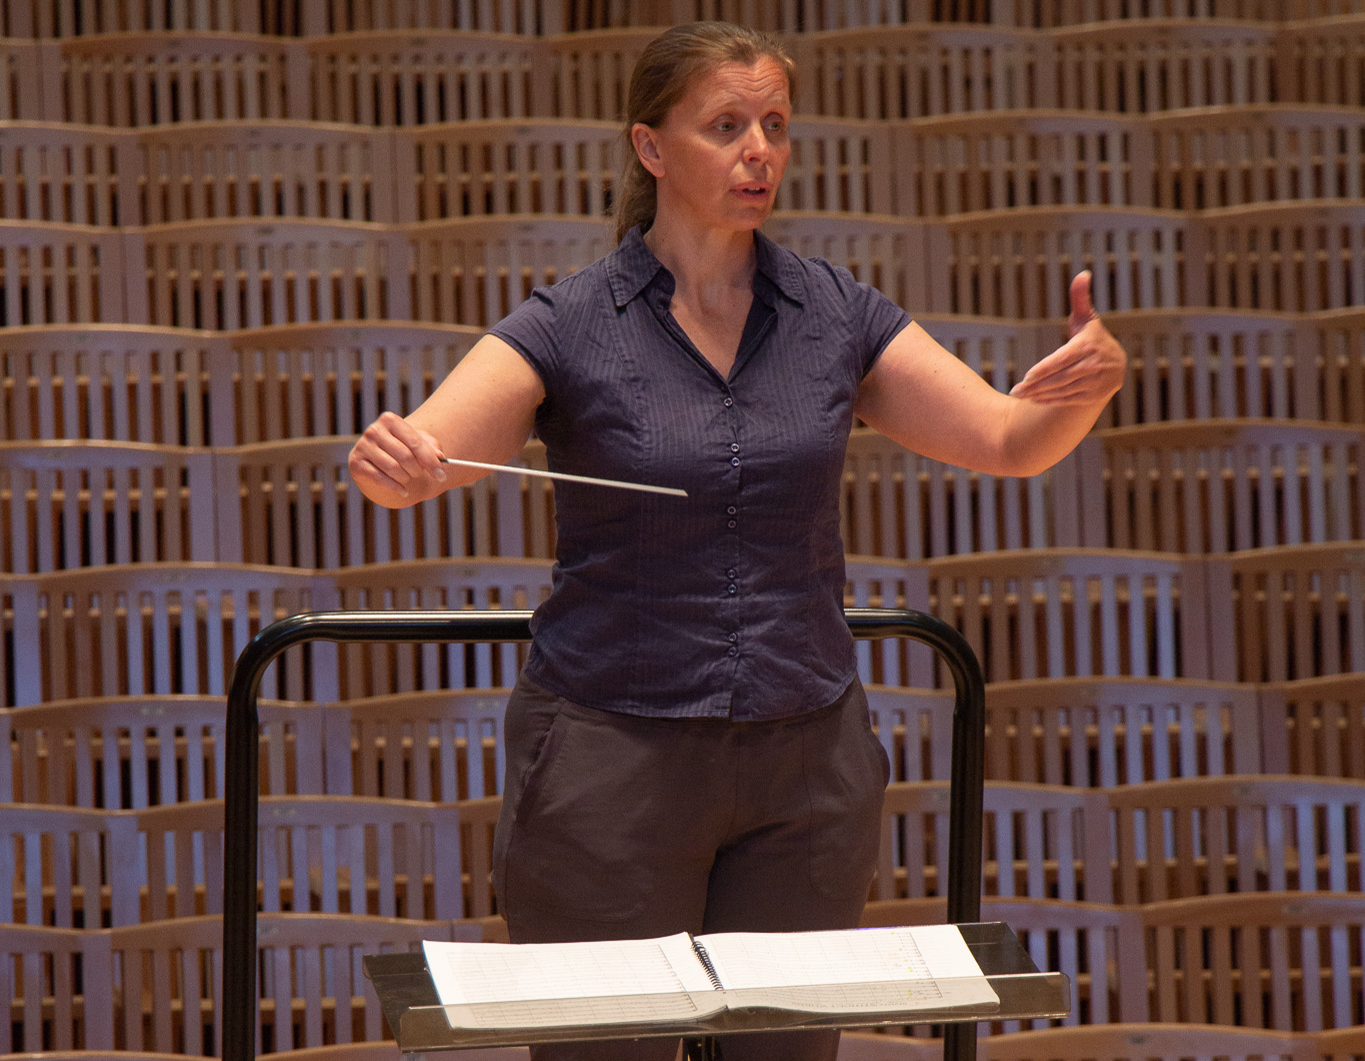 person conducting with arms pointed inward